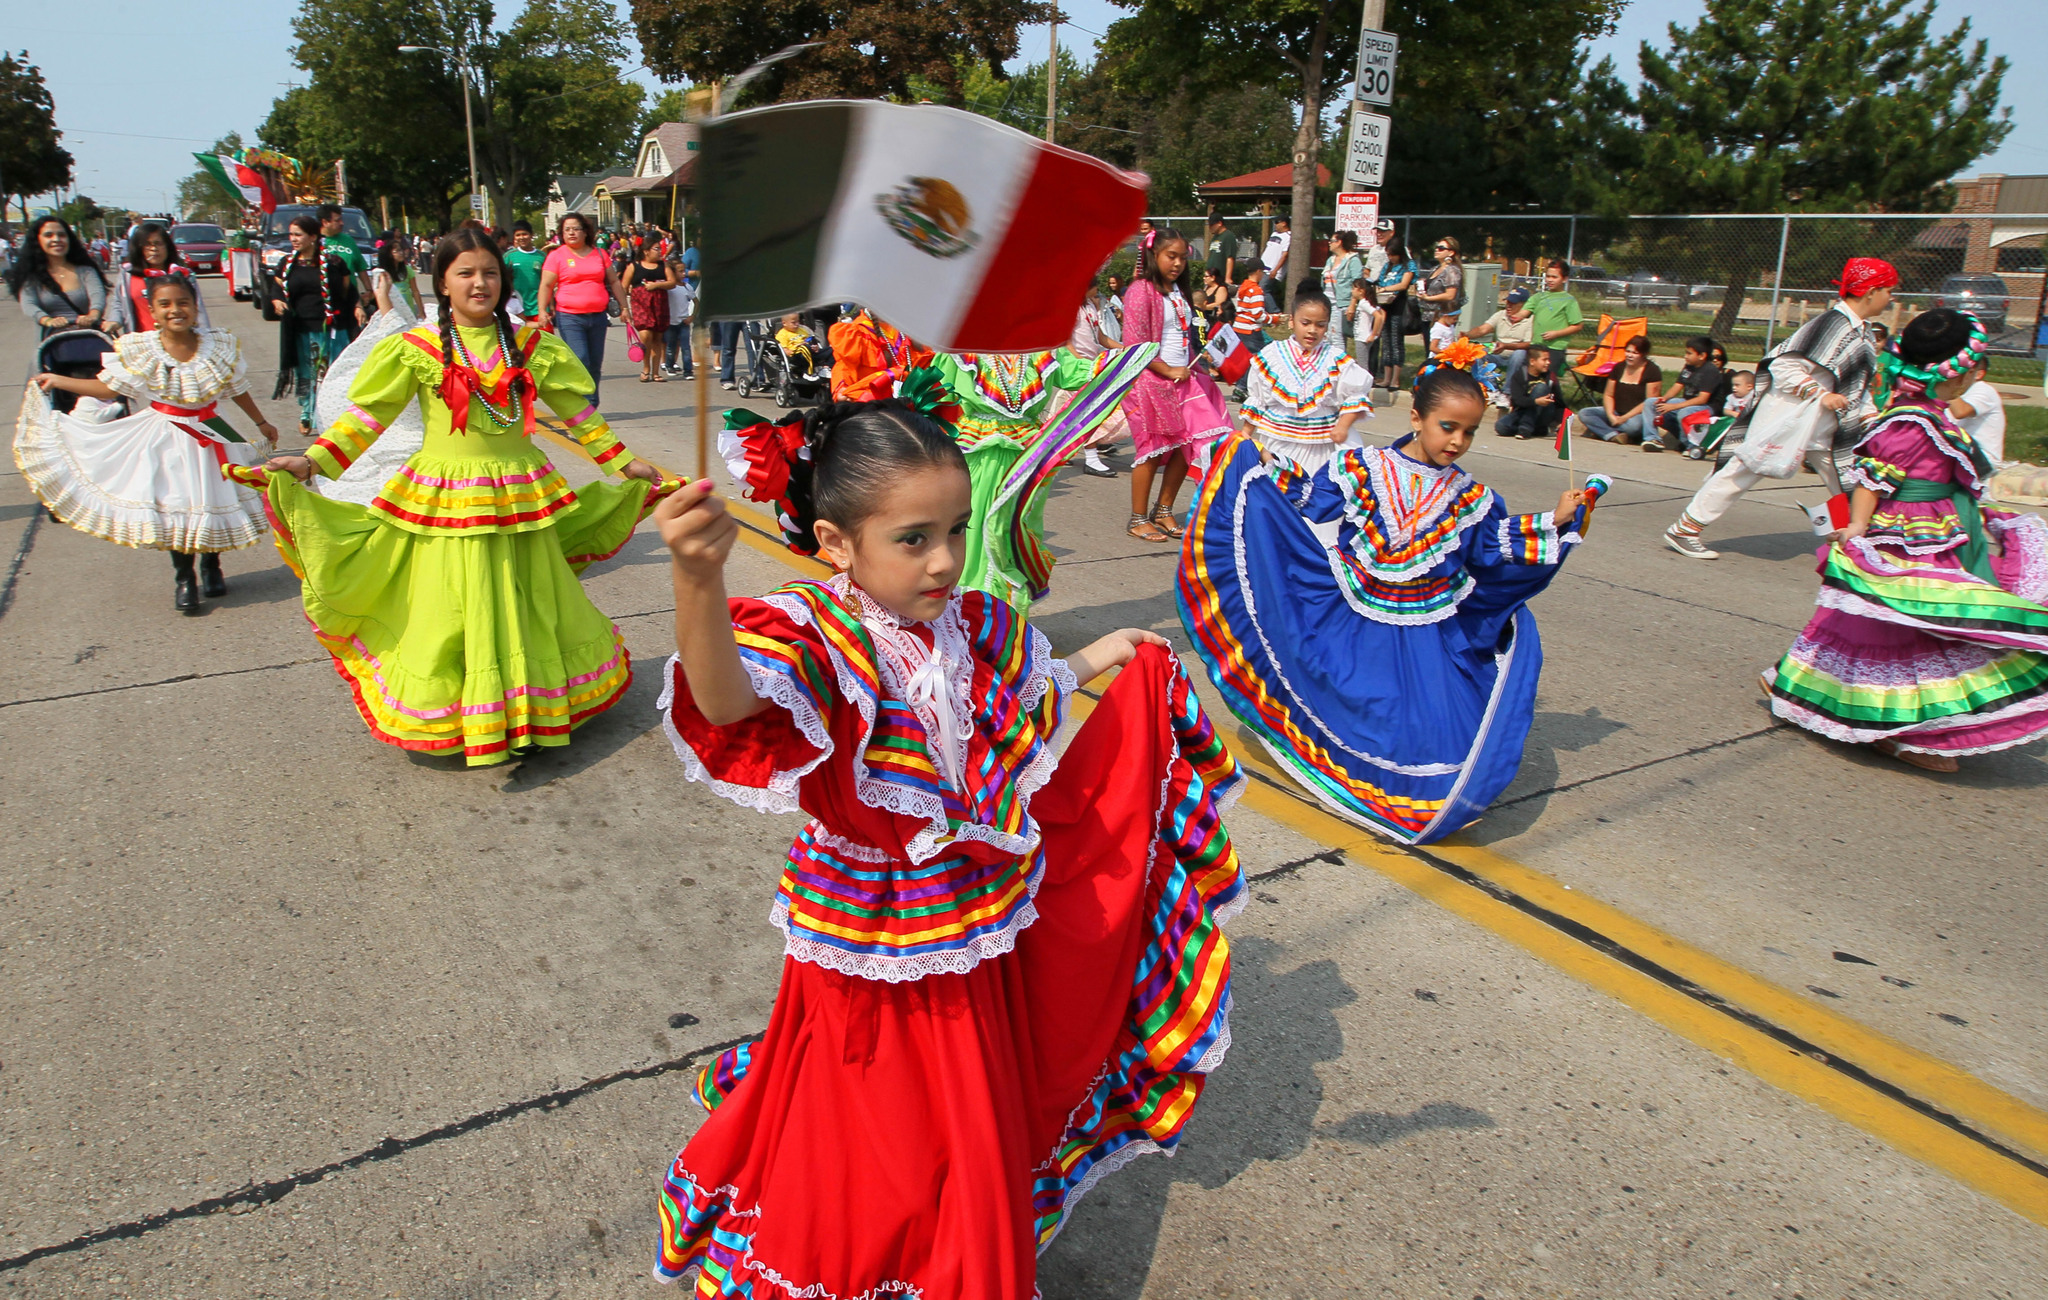 September 16, 2012 Photographs from the Mexican independence day parade. It kicked off at S.20th and Oklahoma and ended at the UMOS center at 2701 S. Chase Ave. The event celebrates the Mexican War of Independence, from Spanish colonial authority. Dancers in traditional Mexican dresses filled the street with color as they passed. MICHAEL SEARS/MSEARS@JOURNALSENTINEL.COM